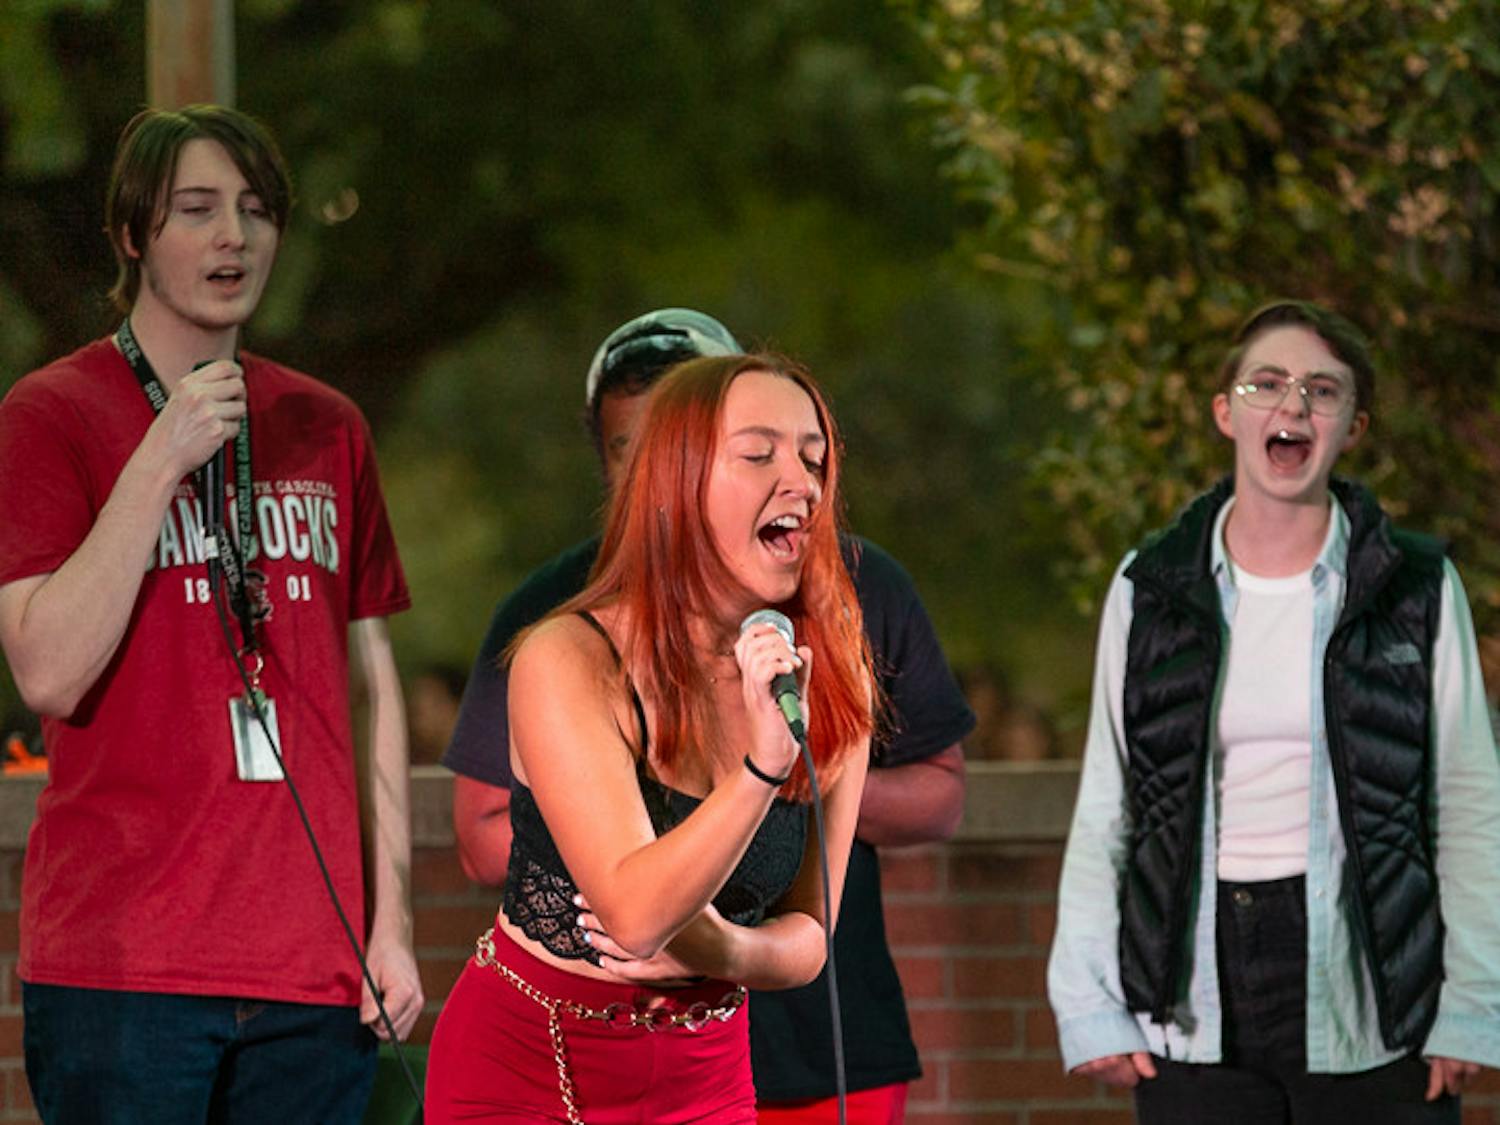 Third-year psychology student Erin McDonough sings with the background choir during The Resonance's performance at the USC Battle of the Bands on Oct. 5, 2022. The competition, brought acappella, folk, rap and rock music to the Russell House Patio in a variety of performances.